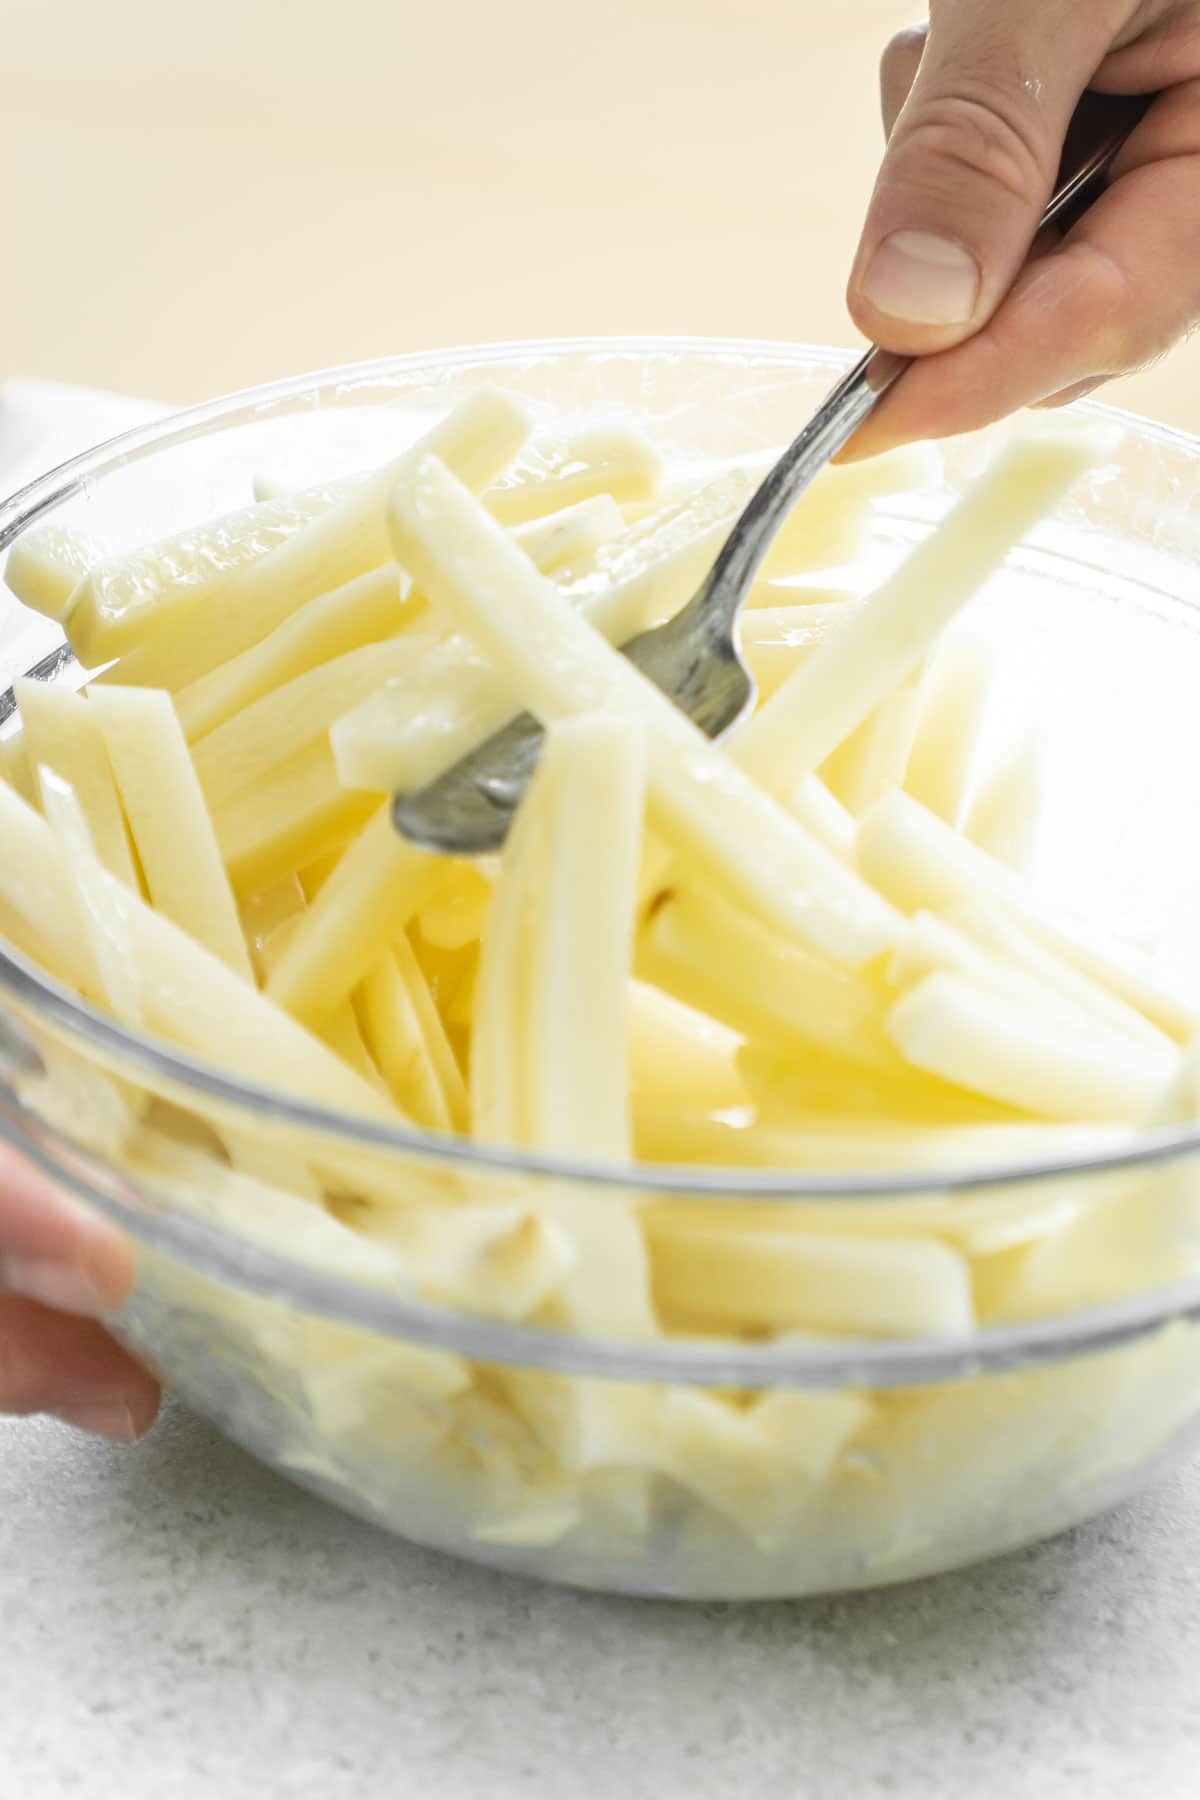 A hand holding a spoon mixing cut potatoes in a glass bowl